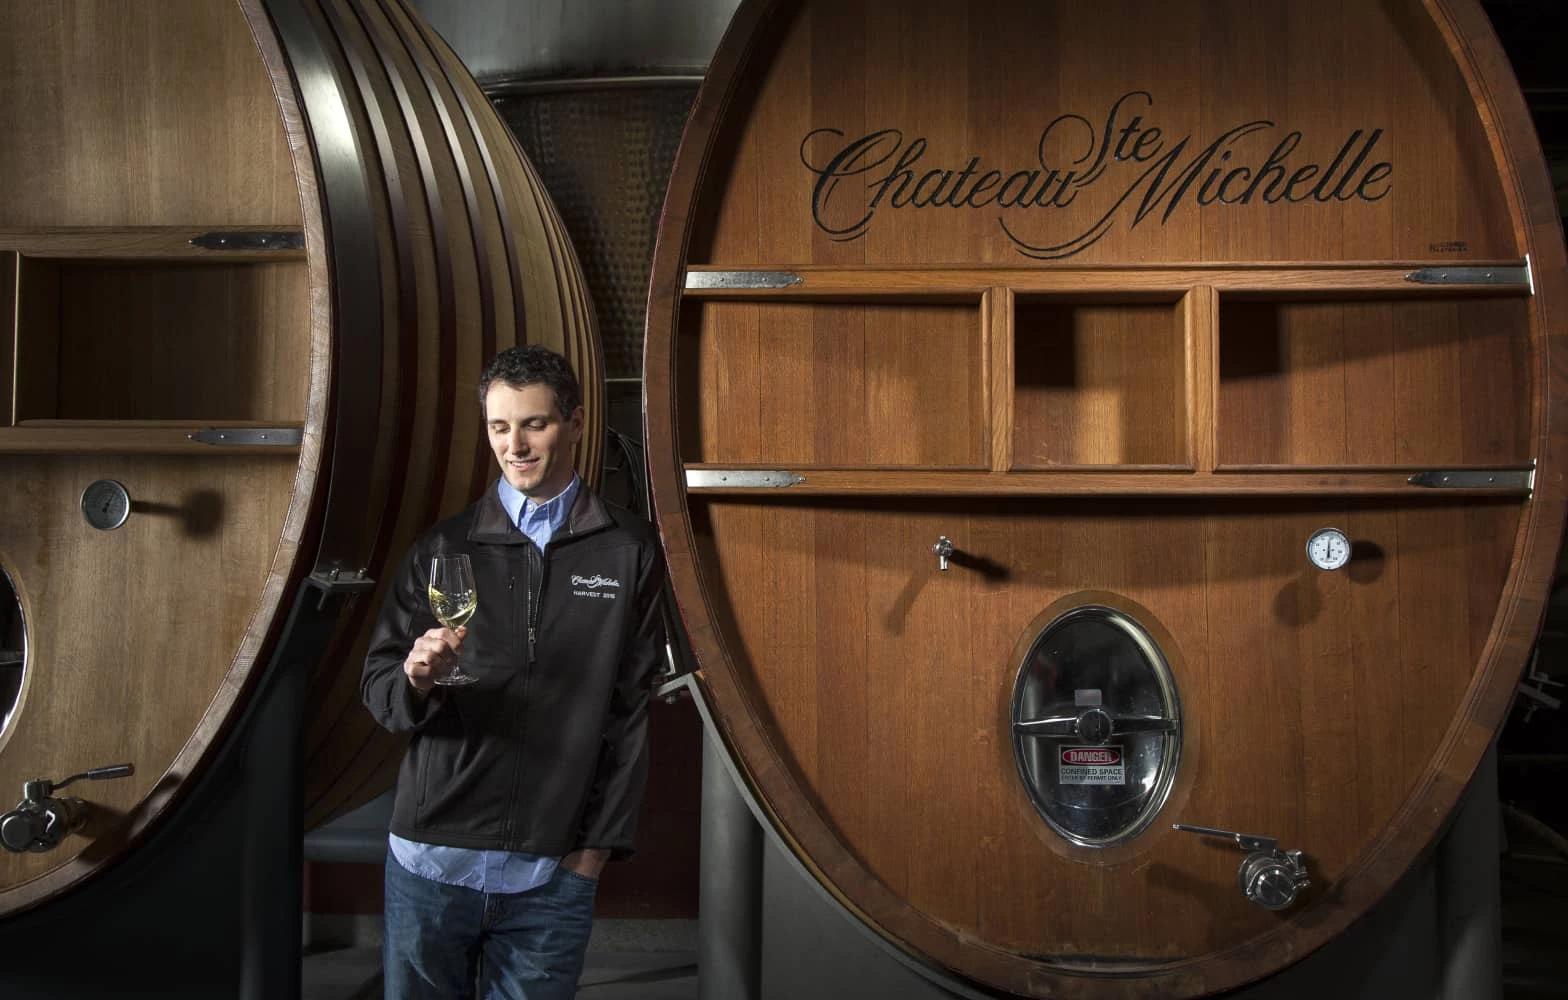 Man looking at a glass on wine in front of a wine barrel